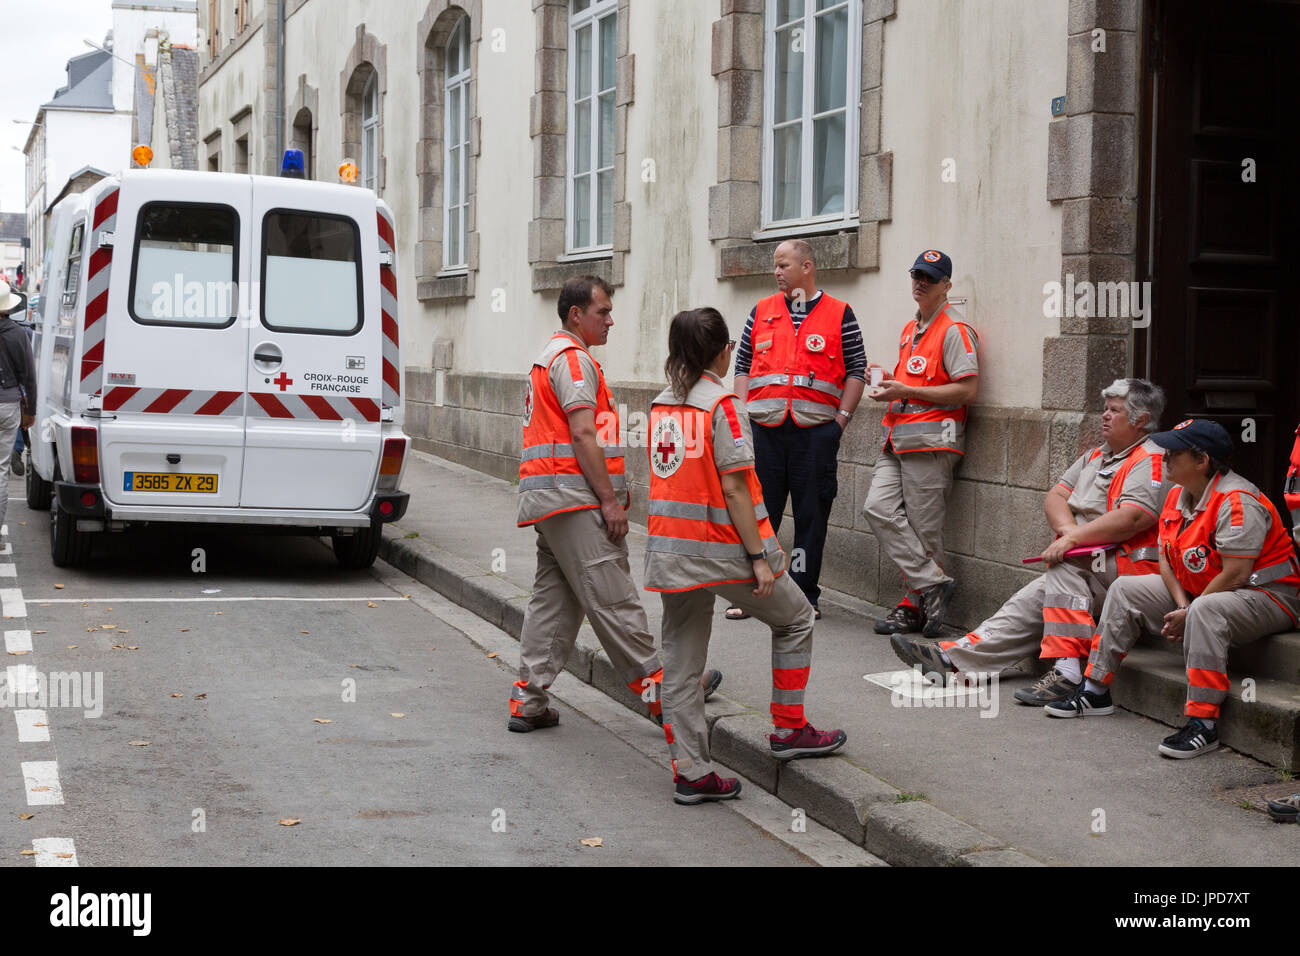 Paramedics working for the Red Cross in France on duty, France, Europe Stock Photo